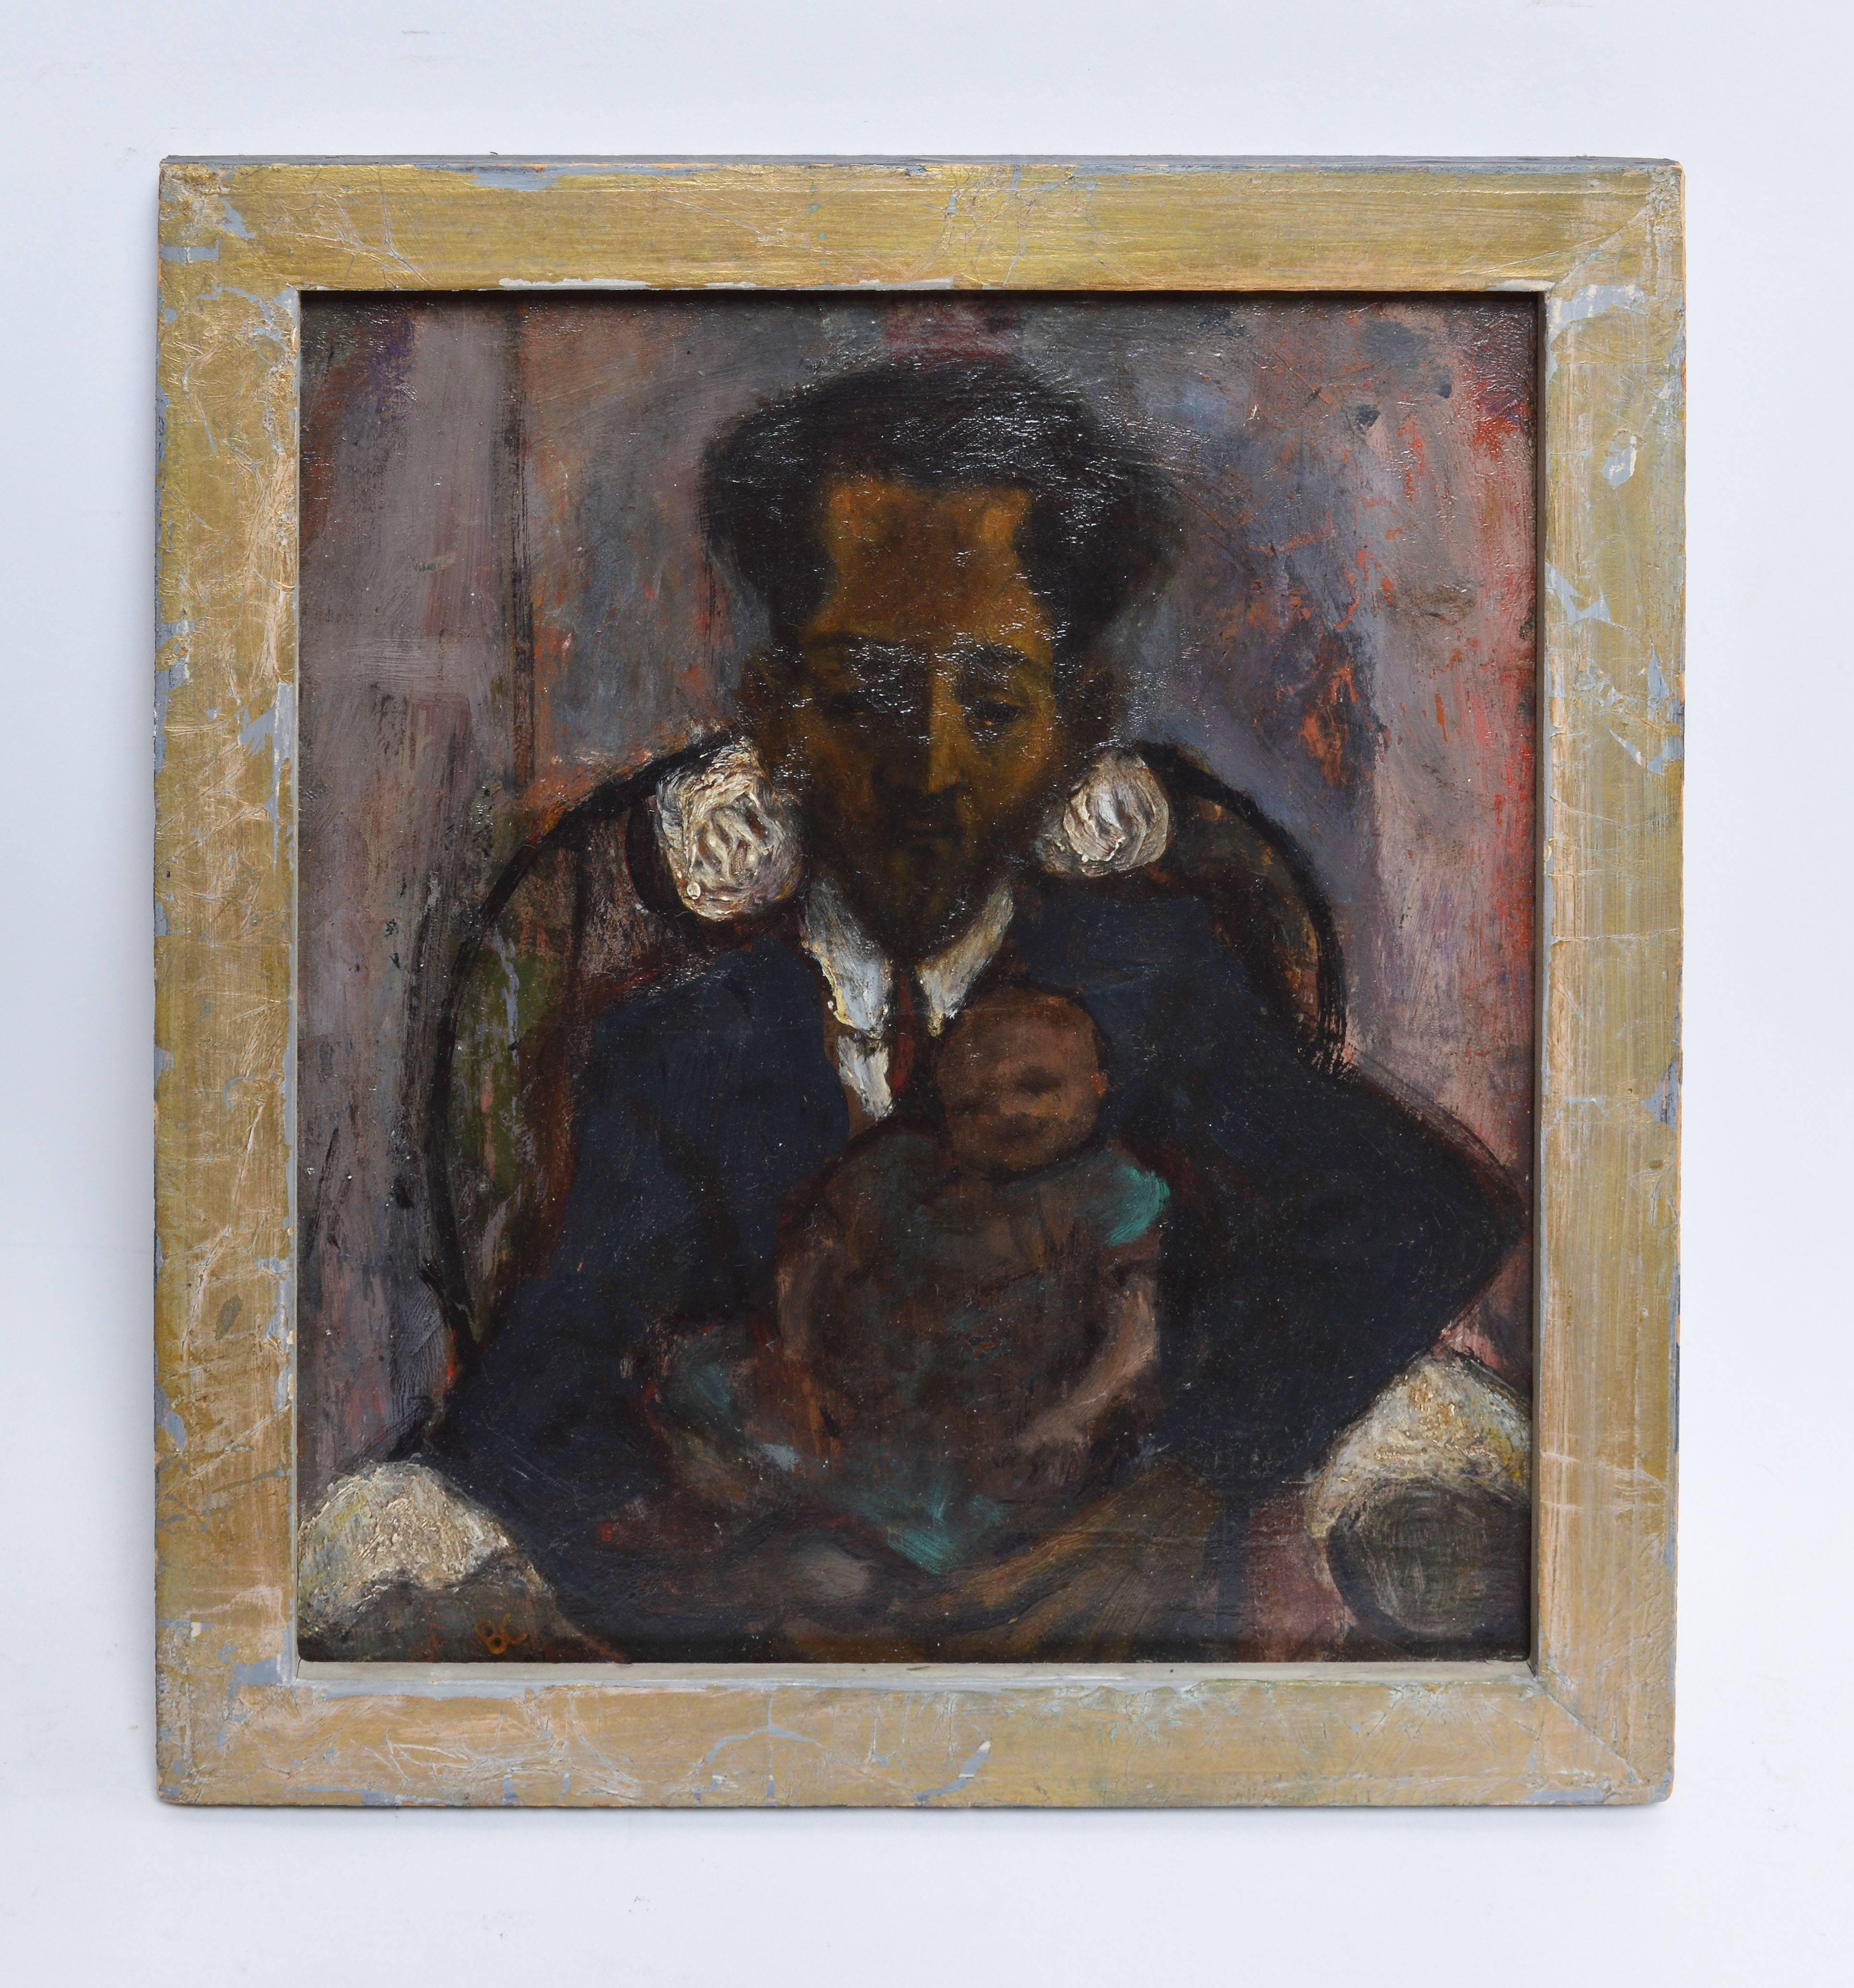 Modernist portrait painting of a father and son by Bernard Chaet (1924-2012).  Oil on board, circa 1950.  Signed lower left "BC".  Displayed in a light gold modernist frame.  Image size, 9"L x 13"H, overall 10.5"L x